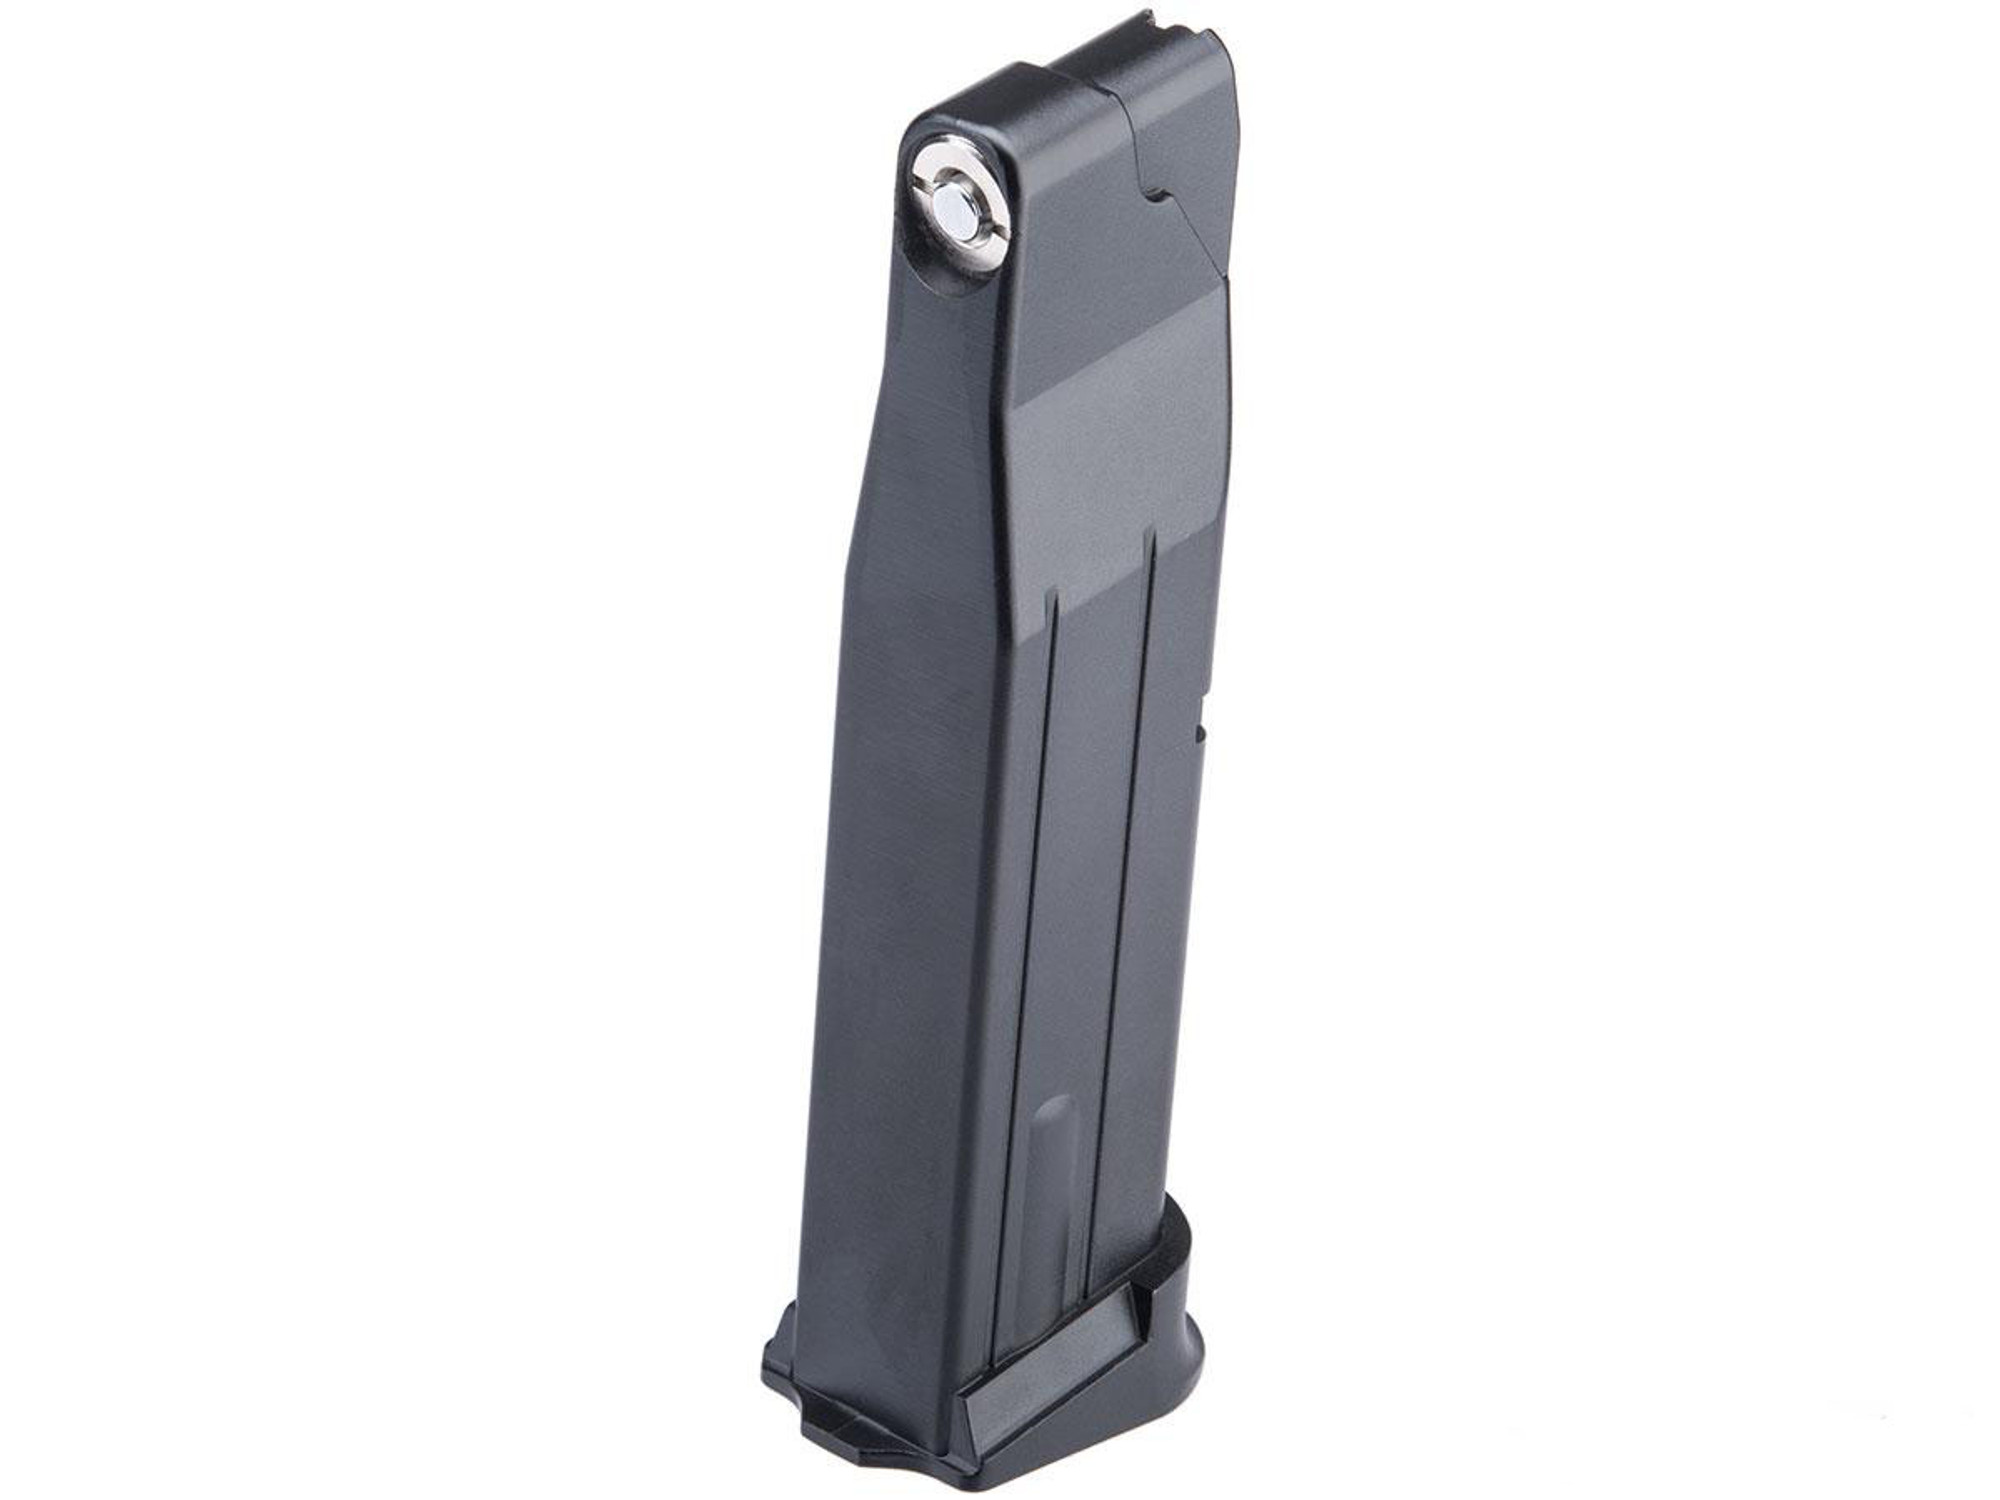 KWC Magazine for Non-Blowback Swiss Arms 2022 4.5mm Air Pistols